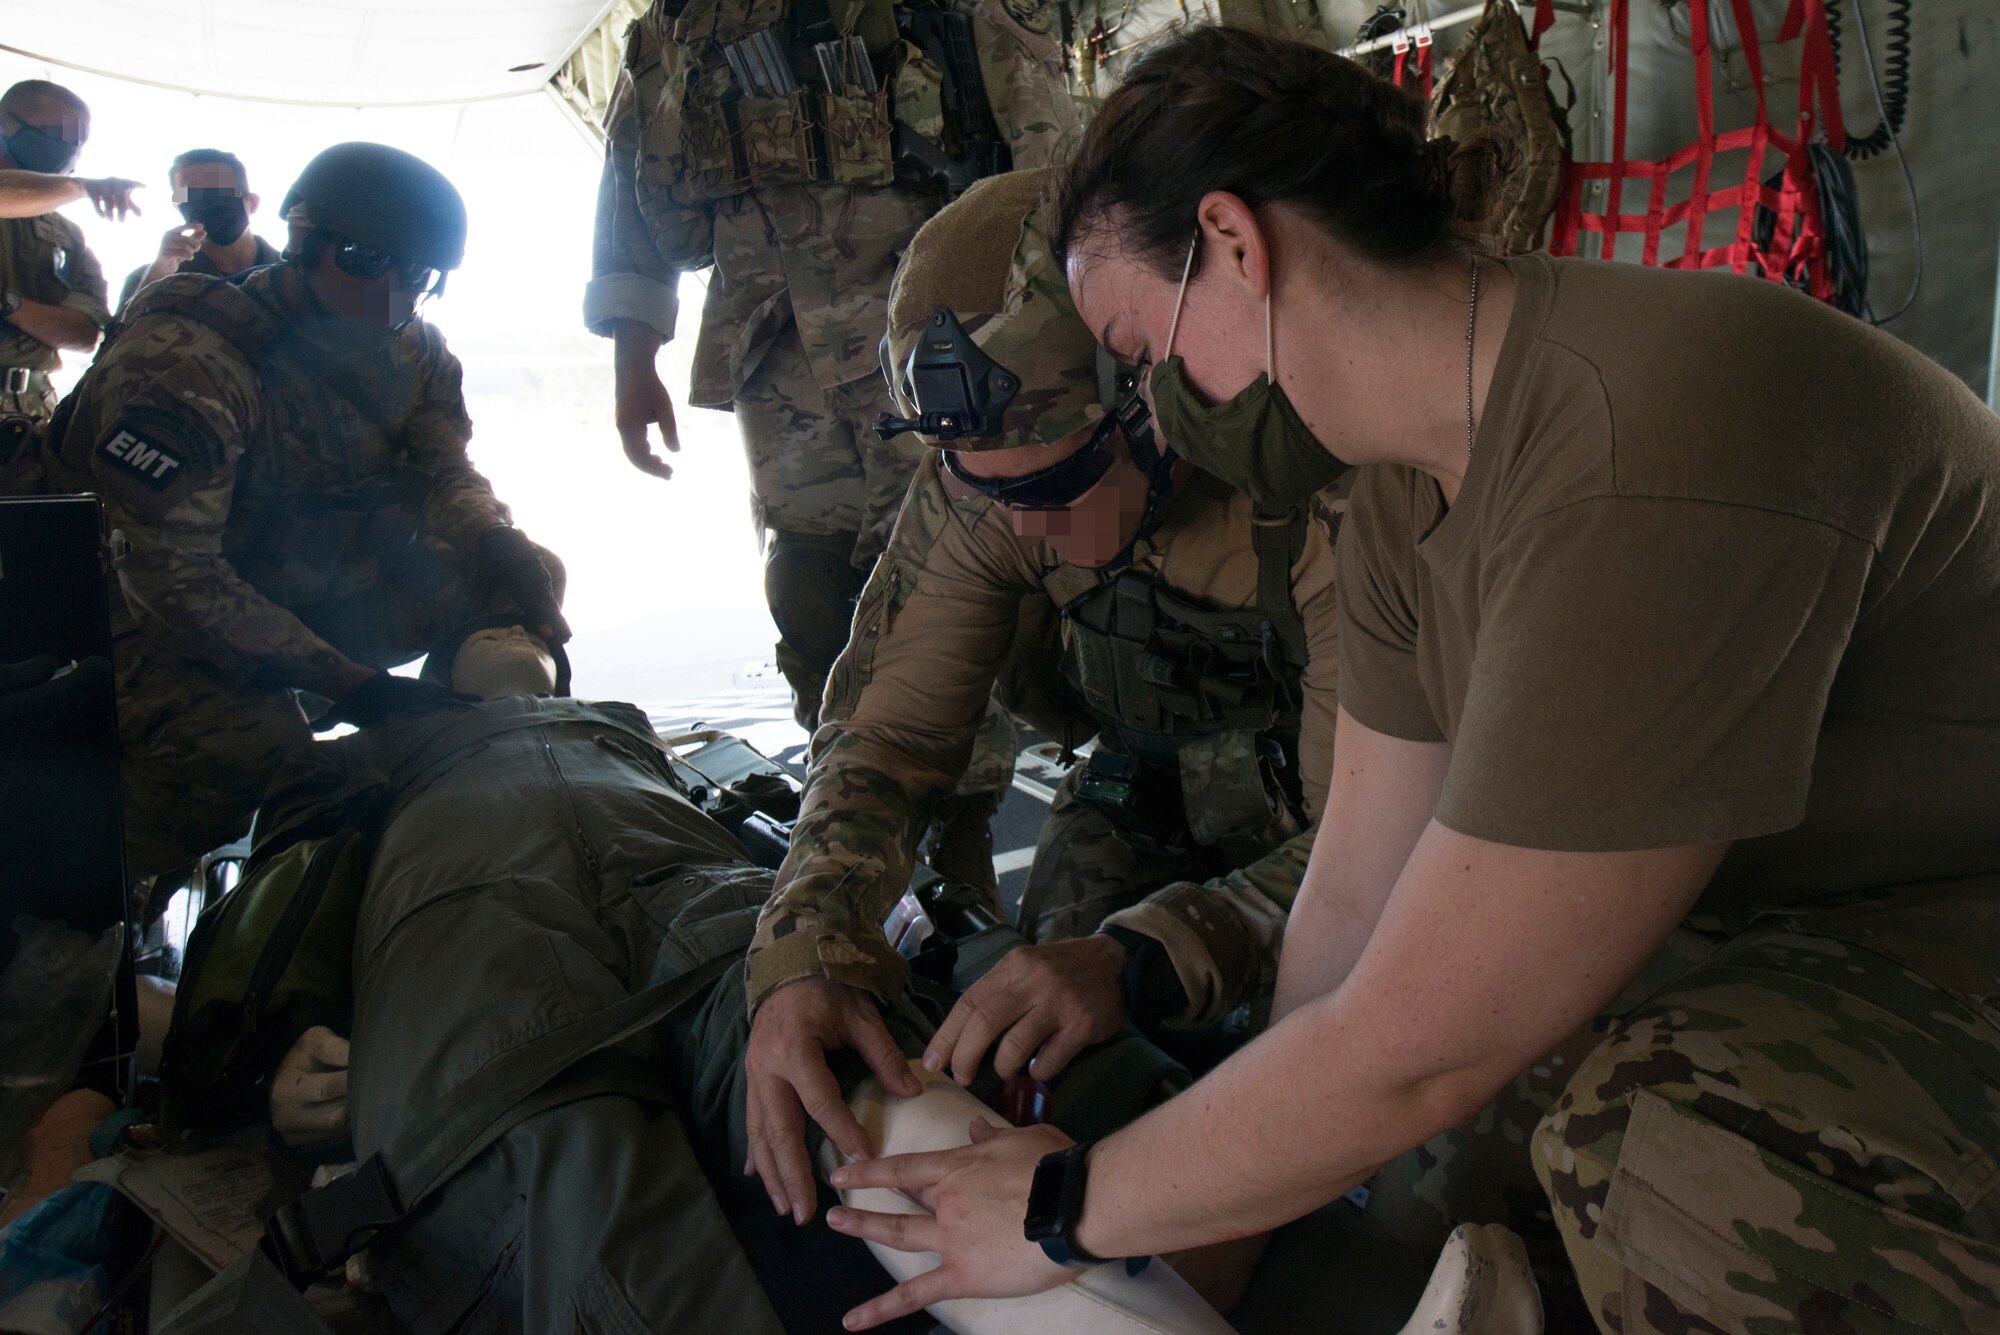 An Airman and a Hellenic forces member tend to a simulated victim.